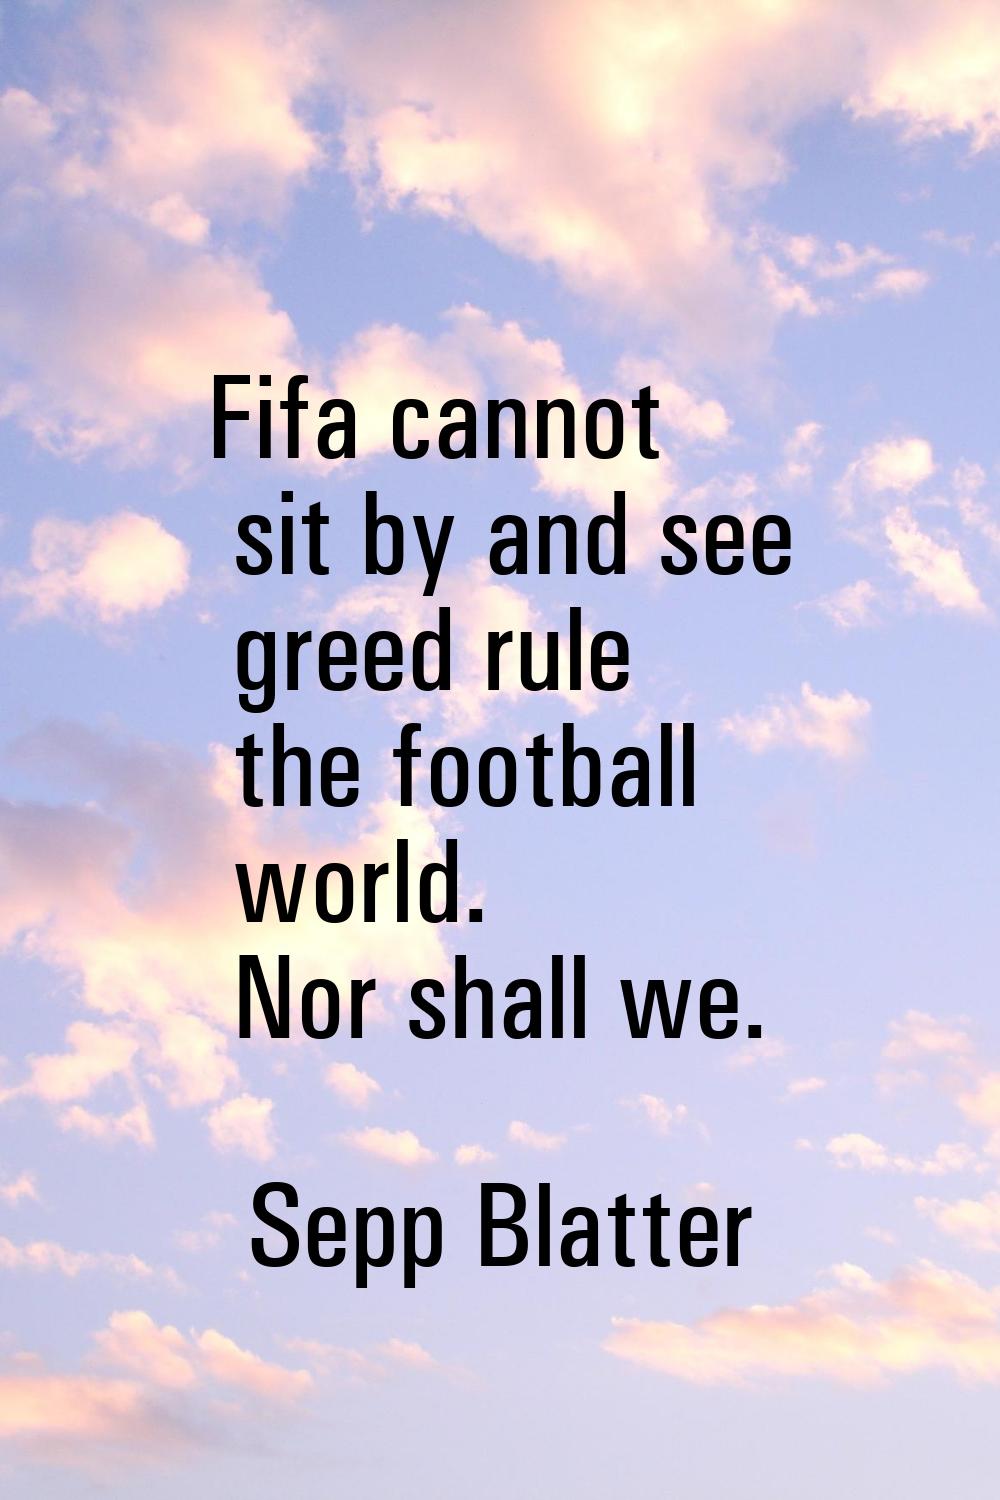 Fifa cannot sit by and see greed rule the football world. Nor shall we.